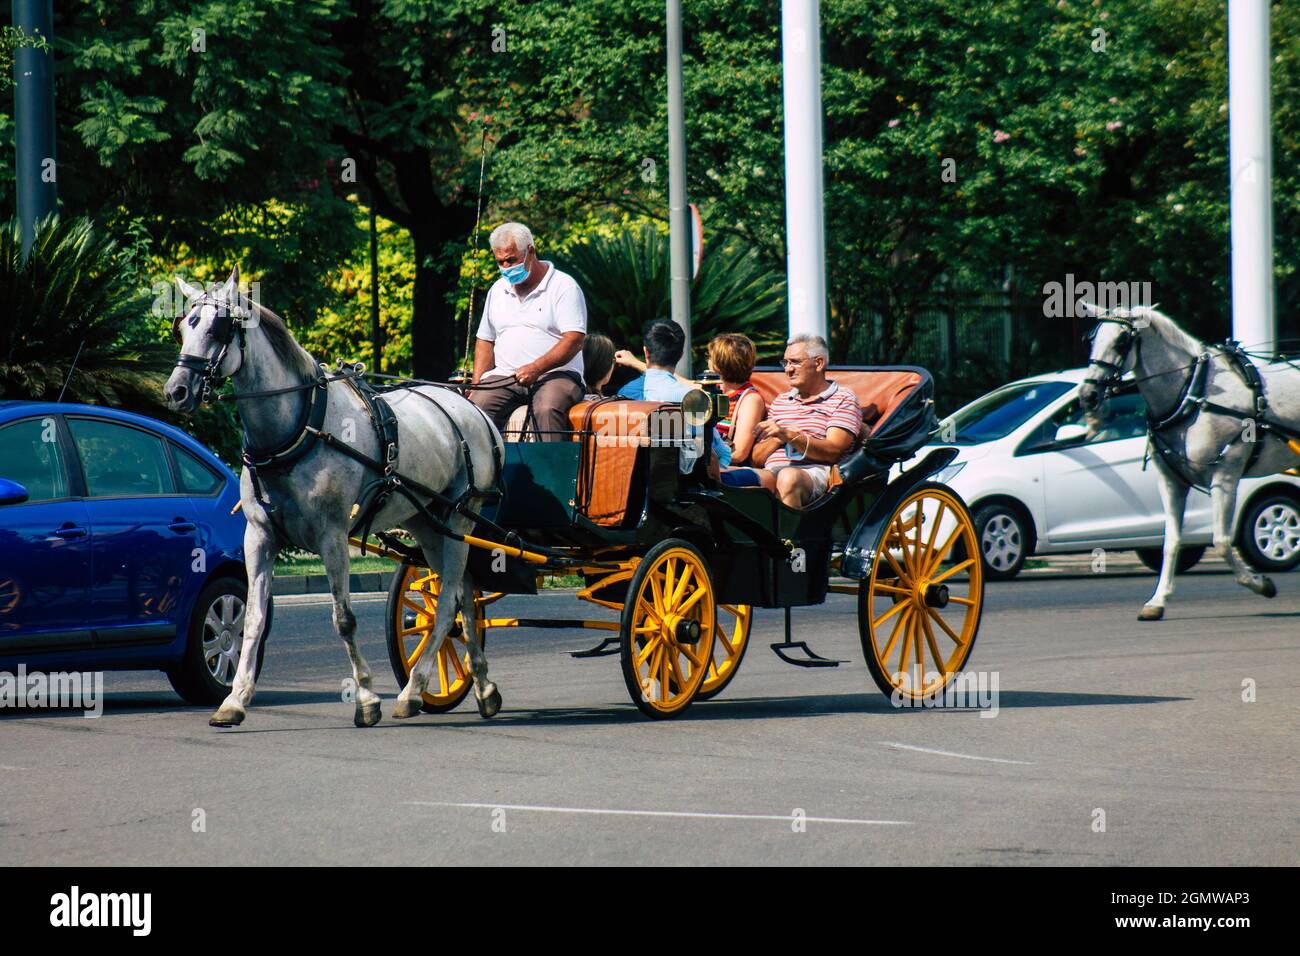 Seville Spain September 15, 2021 Horse drawn carriage ride through the streets of Seville during the coronavirus outbreak hitting Spain, wearing a mas Stock Photo